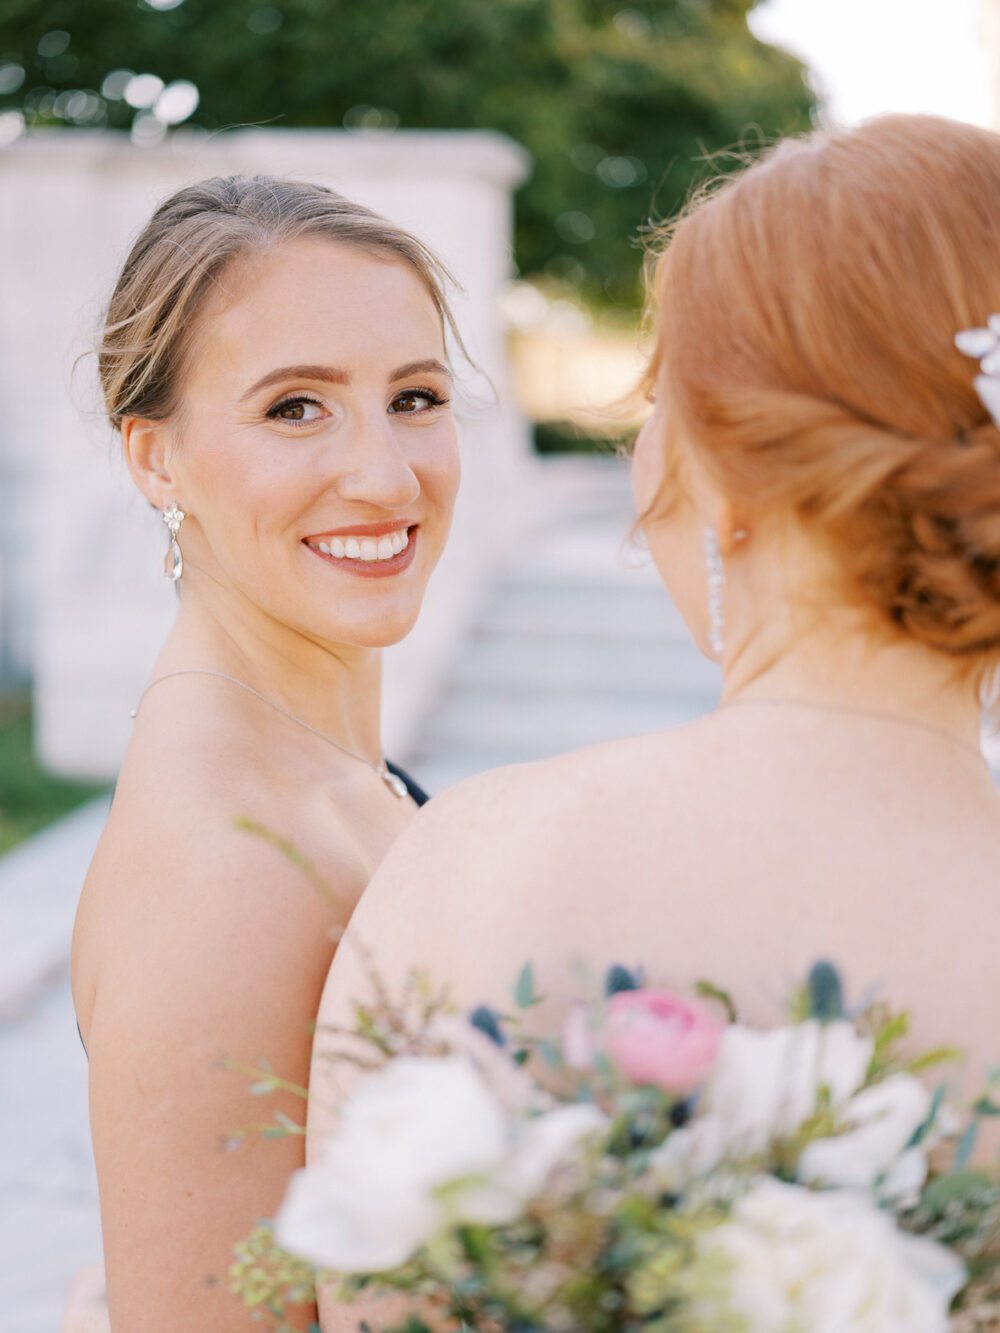 Bride with her bridesmaid during portraits at Cleveland Art Museum 